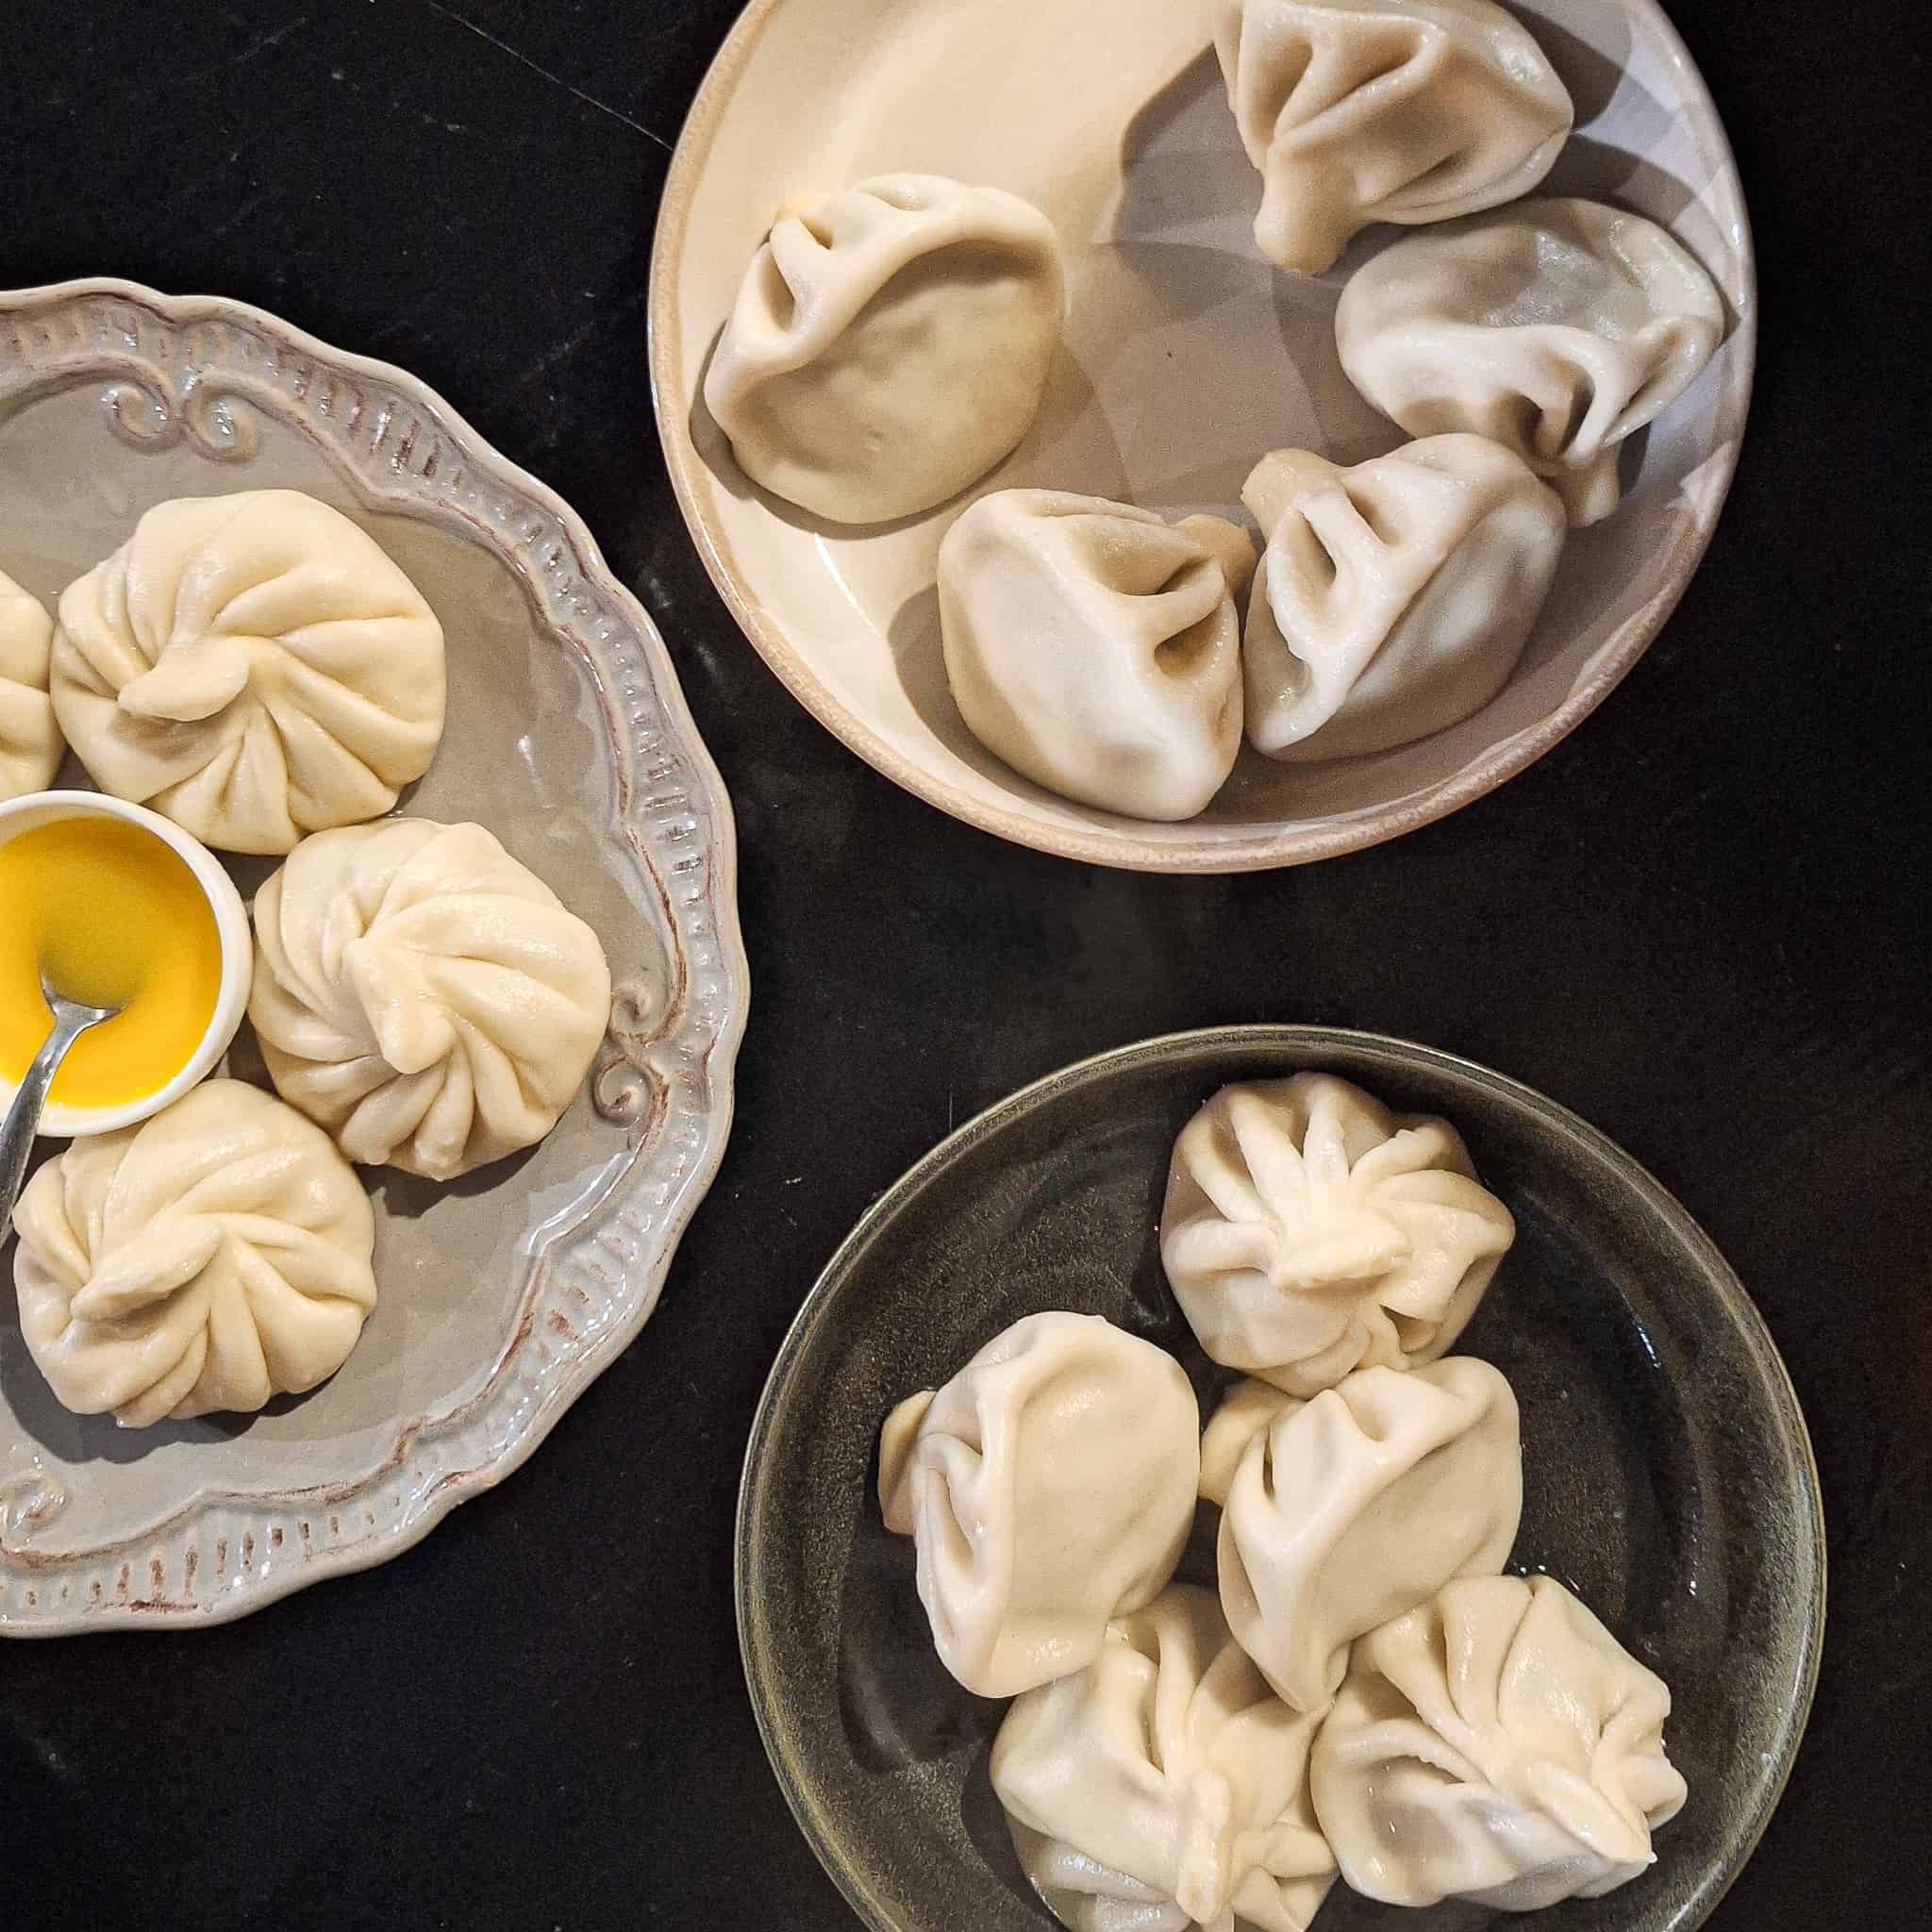 Different plates of khinkali, also known as Georgian dumplings